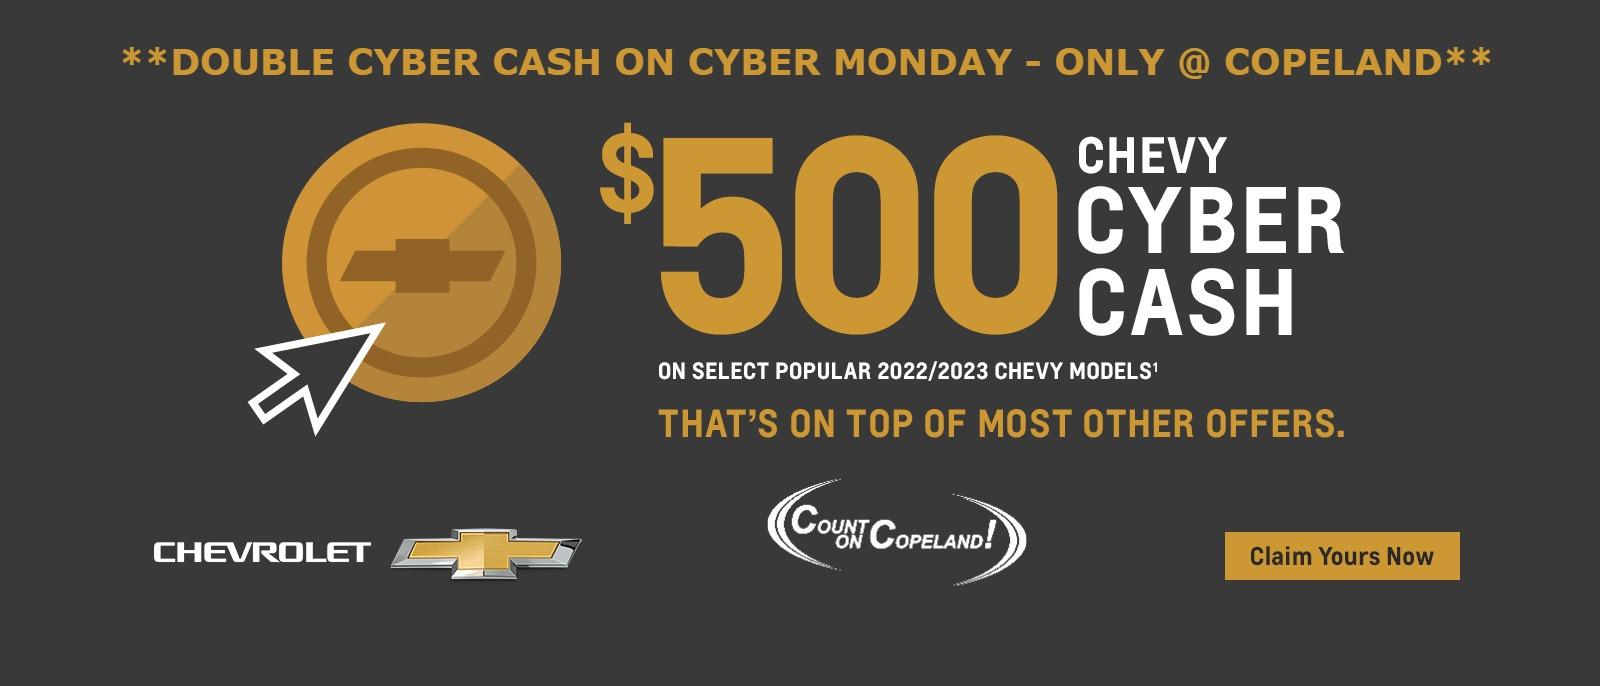 $500 Chevy Cyber Cash on select popular 2022/2023 Chevy models. That's on top of most other offers.